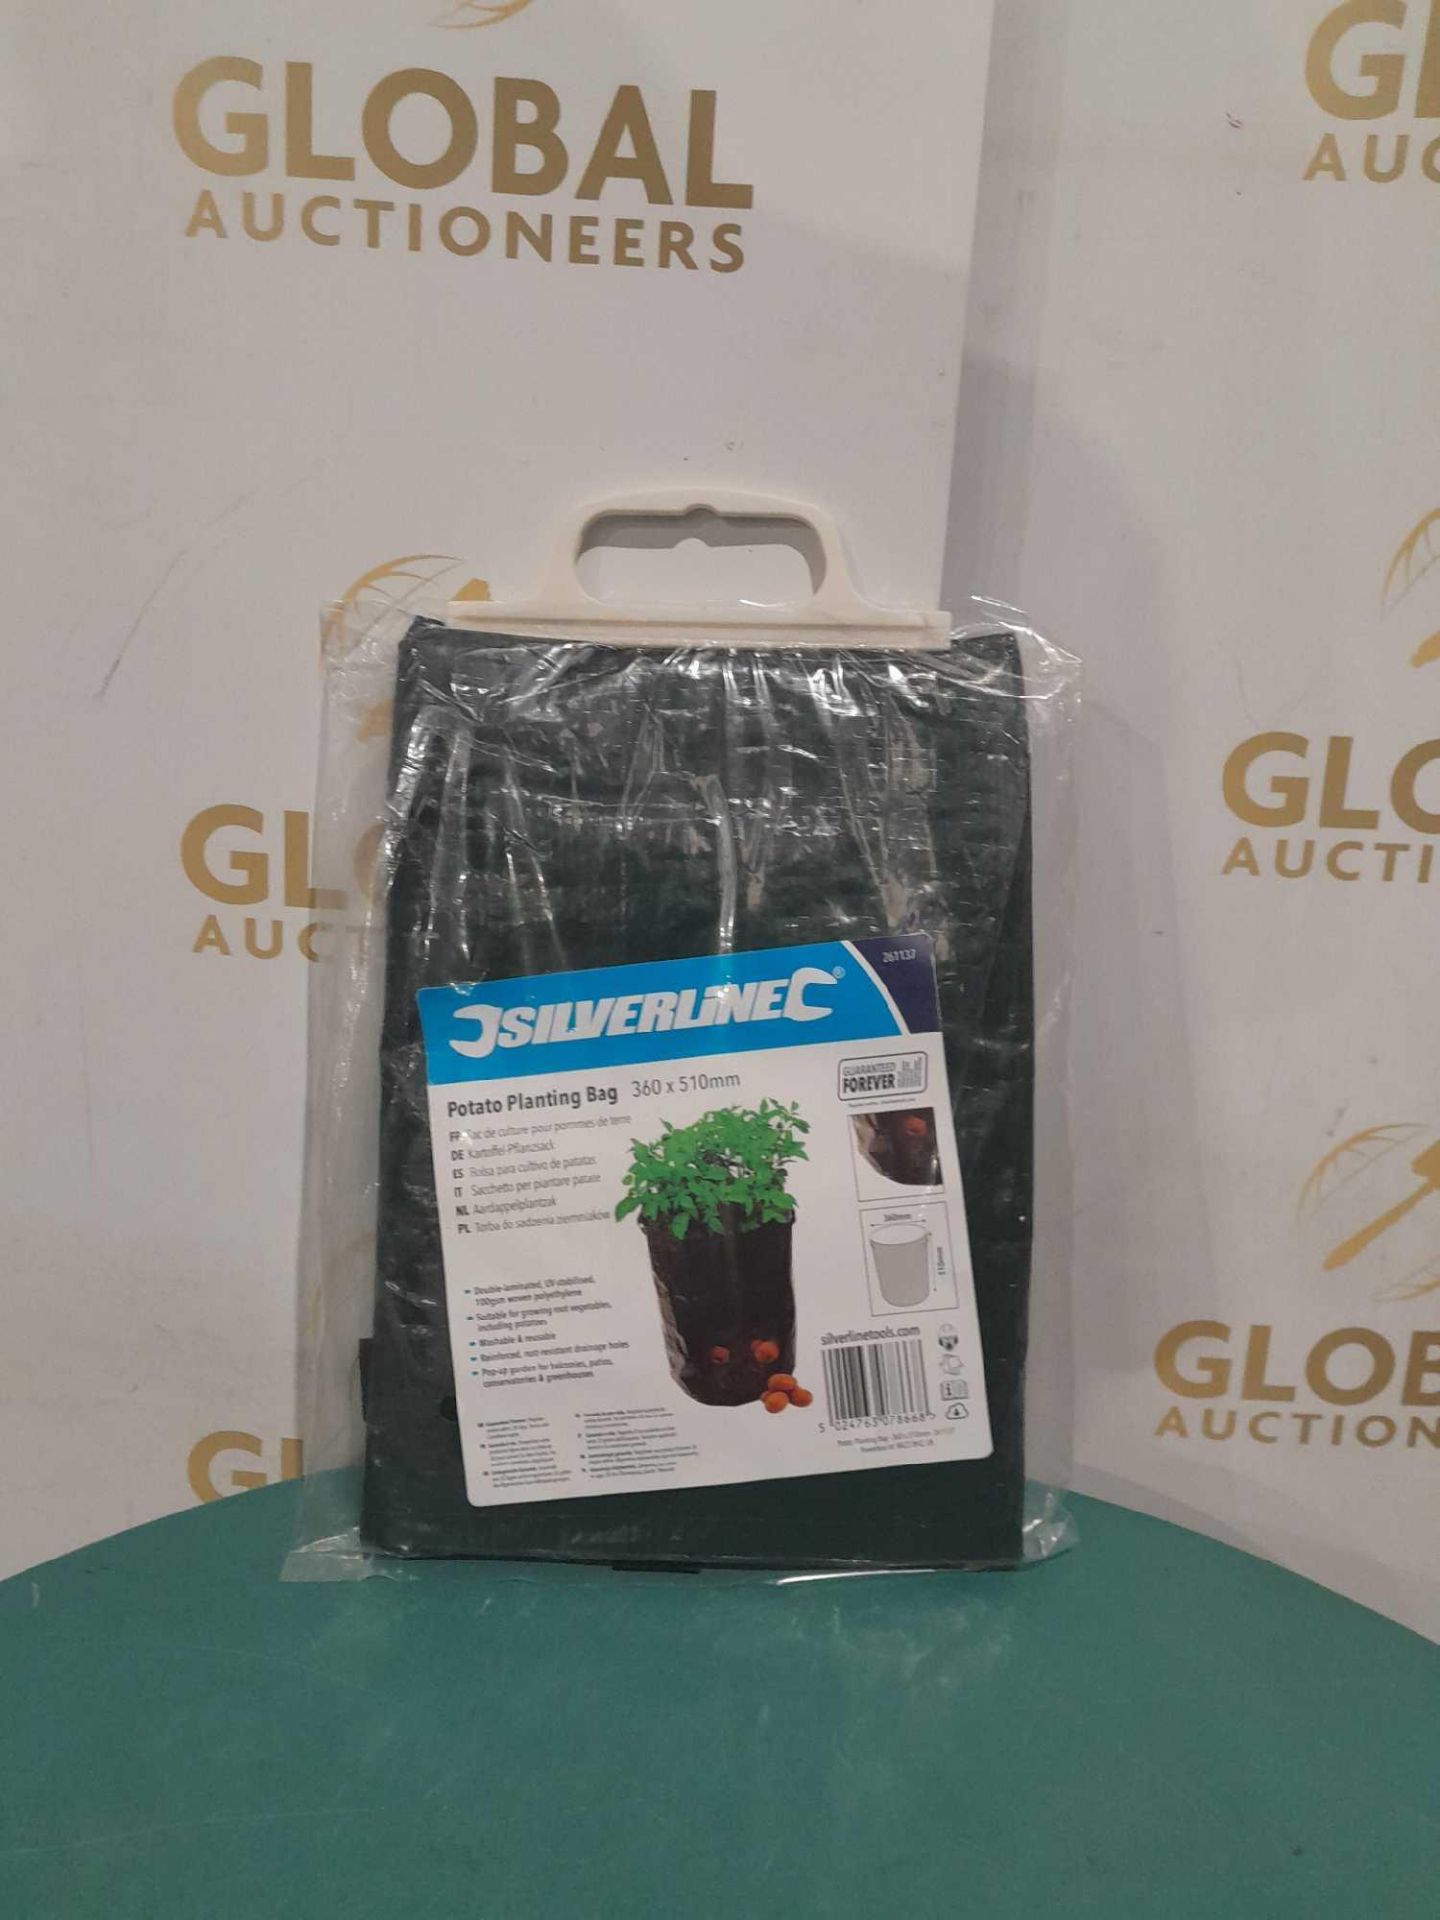 RRP £100 Lot To Contain 20 Bagged Brand New Silverline 360X510Mm Potato Planting Bag - Image 2 of 2